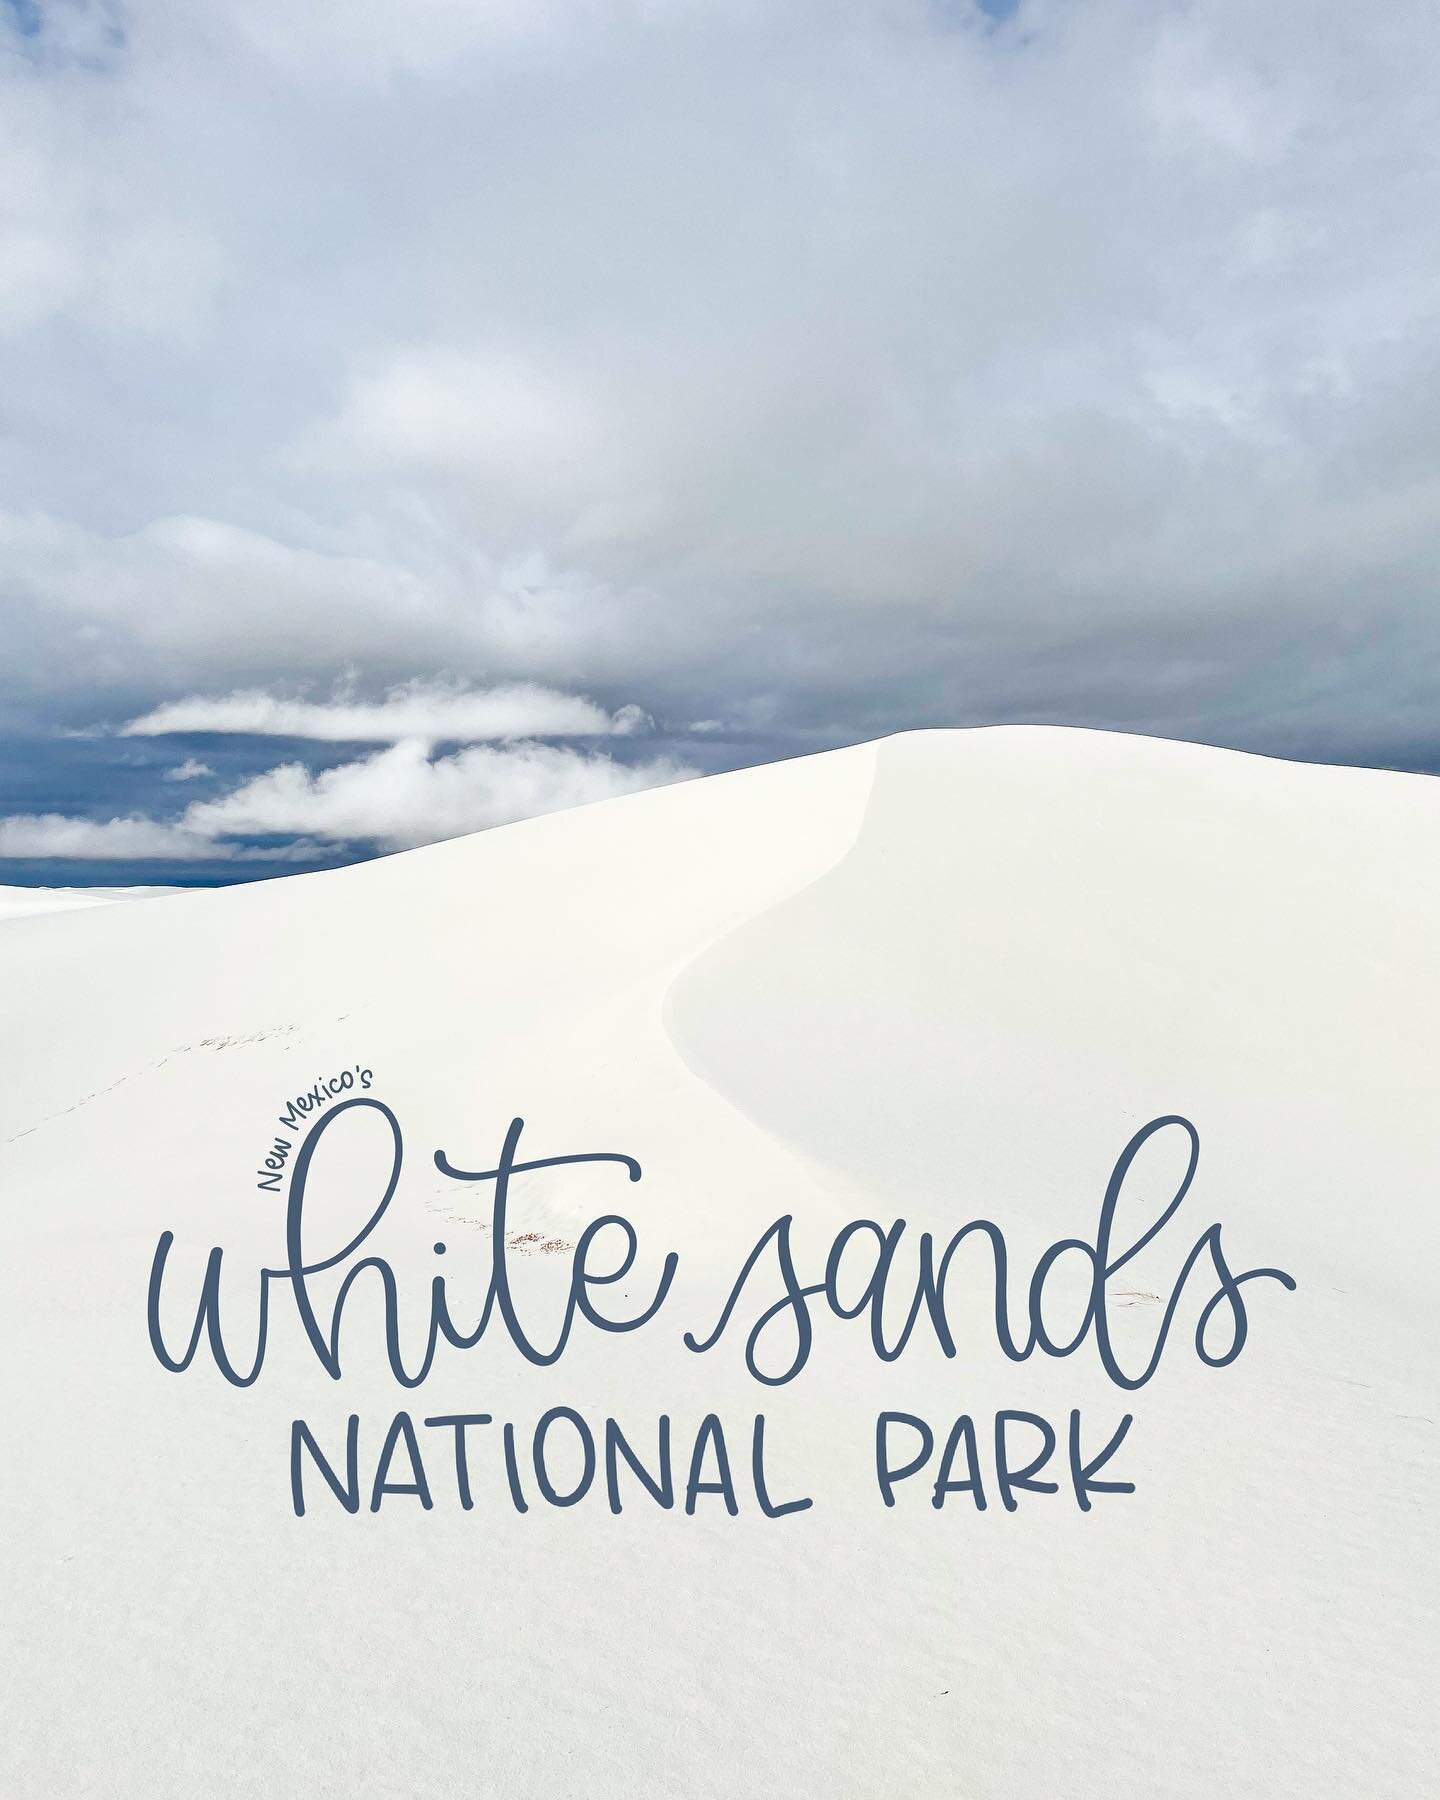 Spent this morning at White Sands national park. I highly recommend! I&rsquo;m constantly blown away by the things that exist on this planet. Several of the photos in this post will probably work their way into paintings, stickers, and cards. 😊

I h